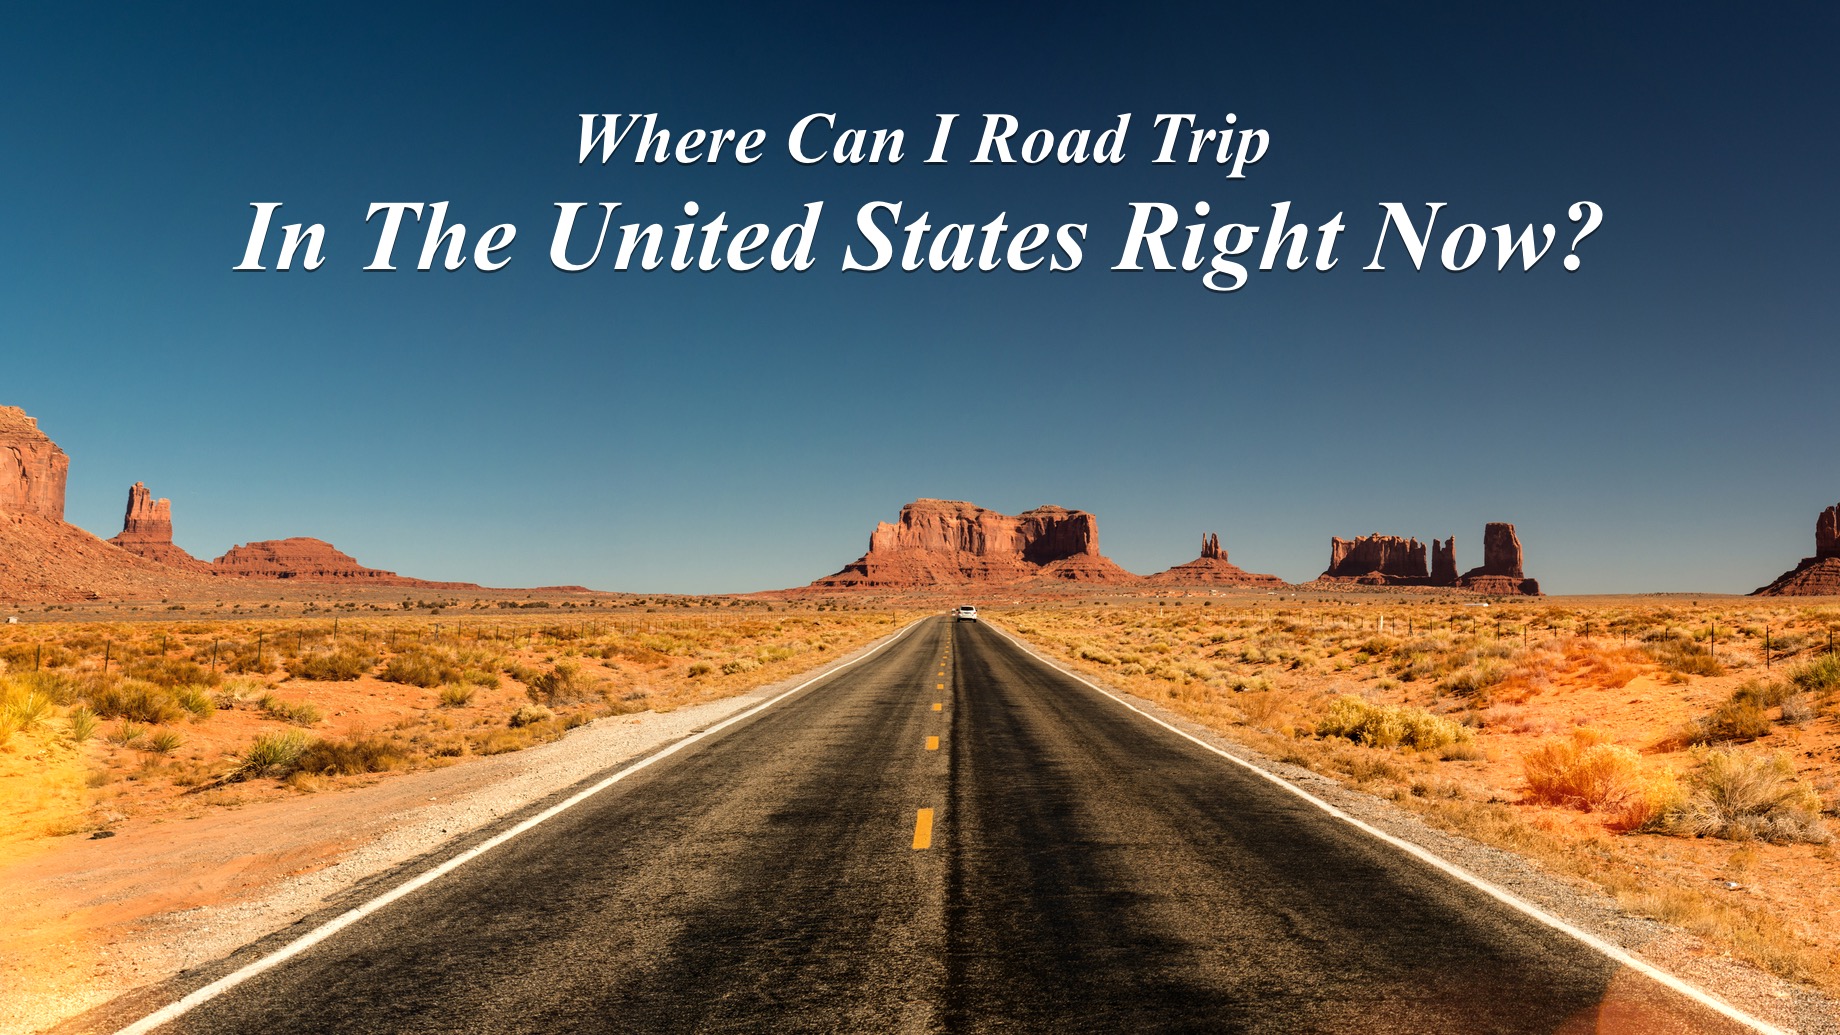 Where Can I Road Trip In The United States Right Now?